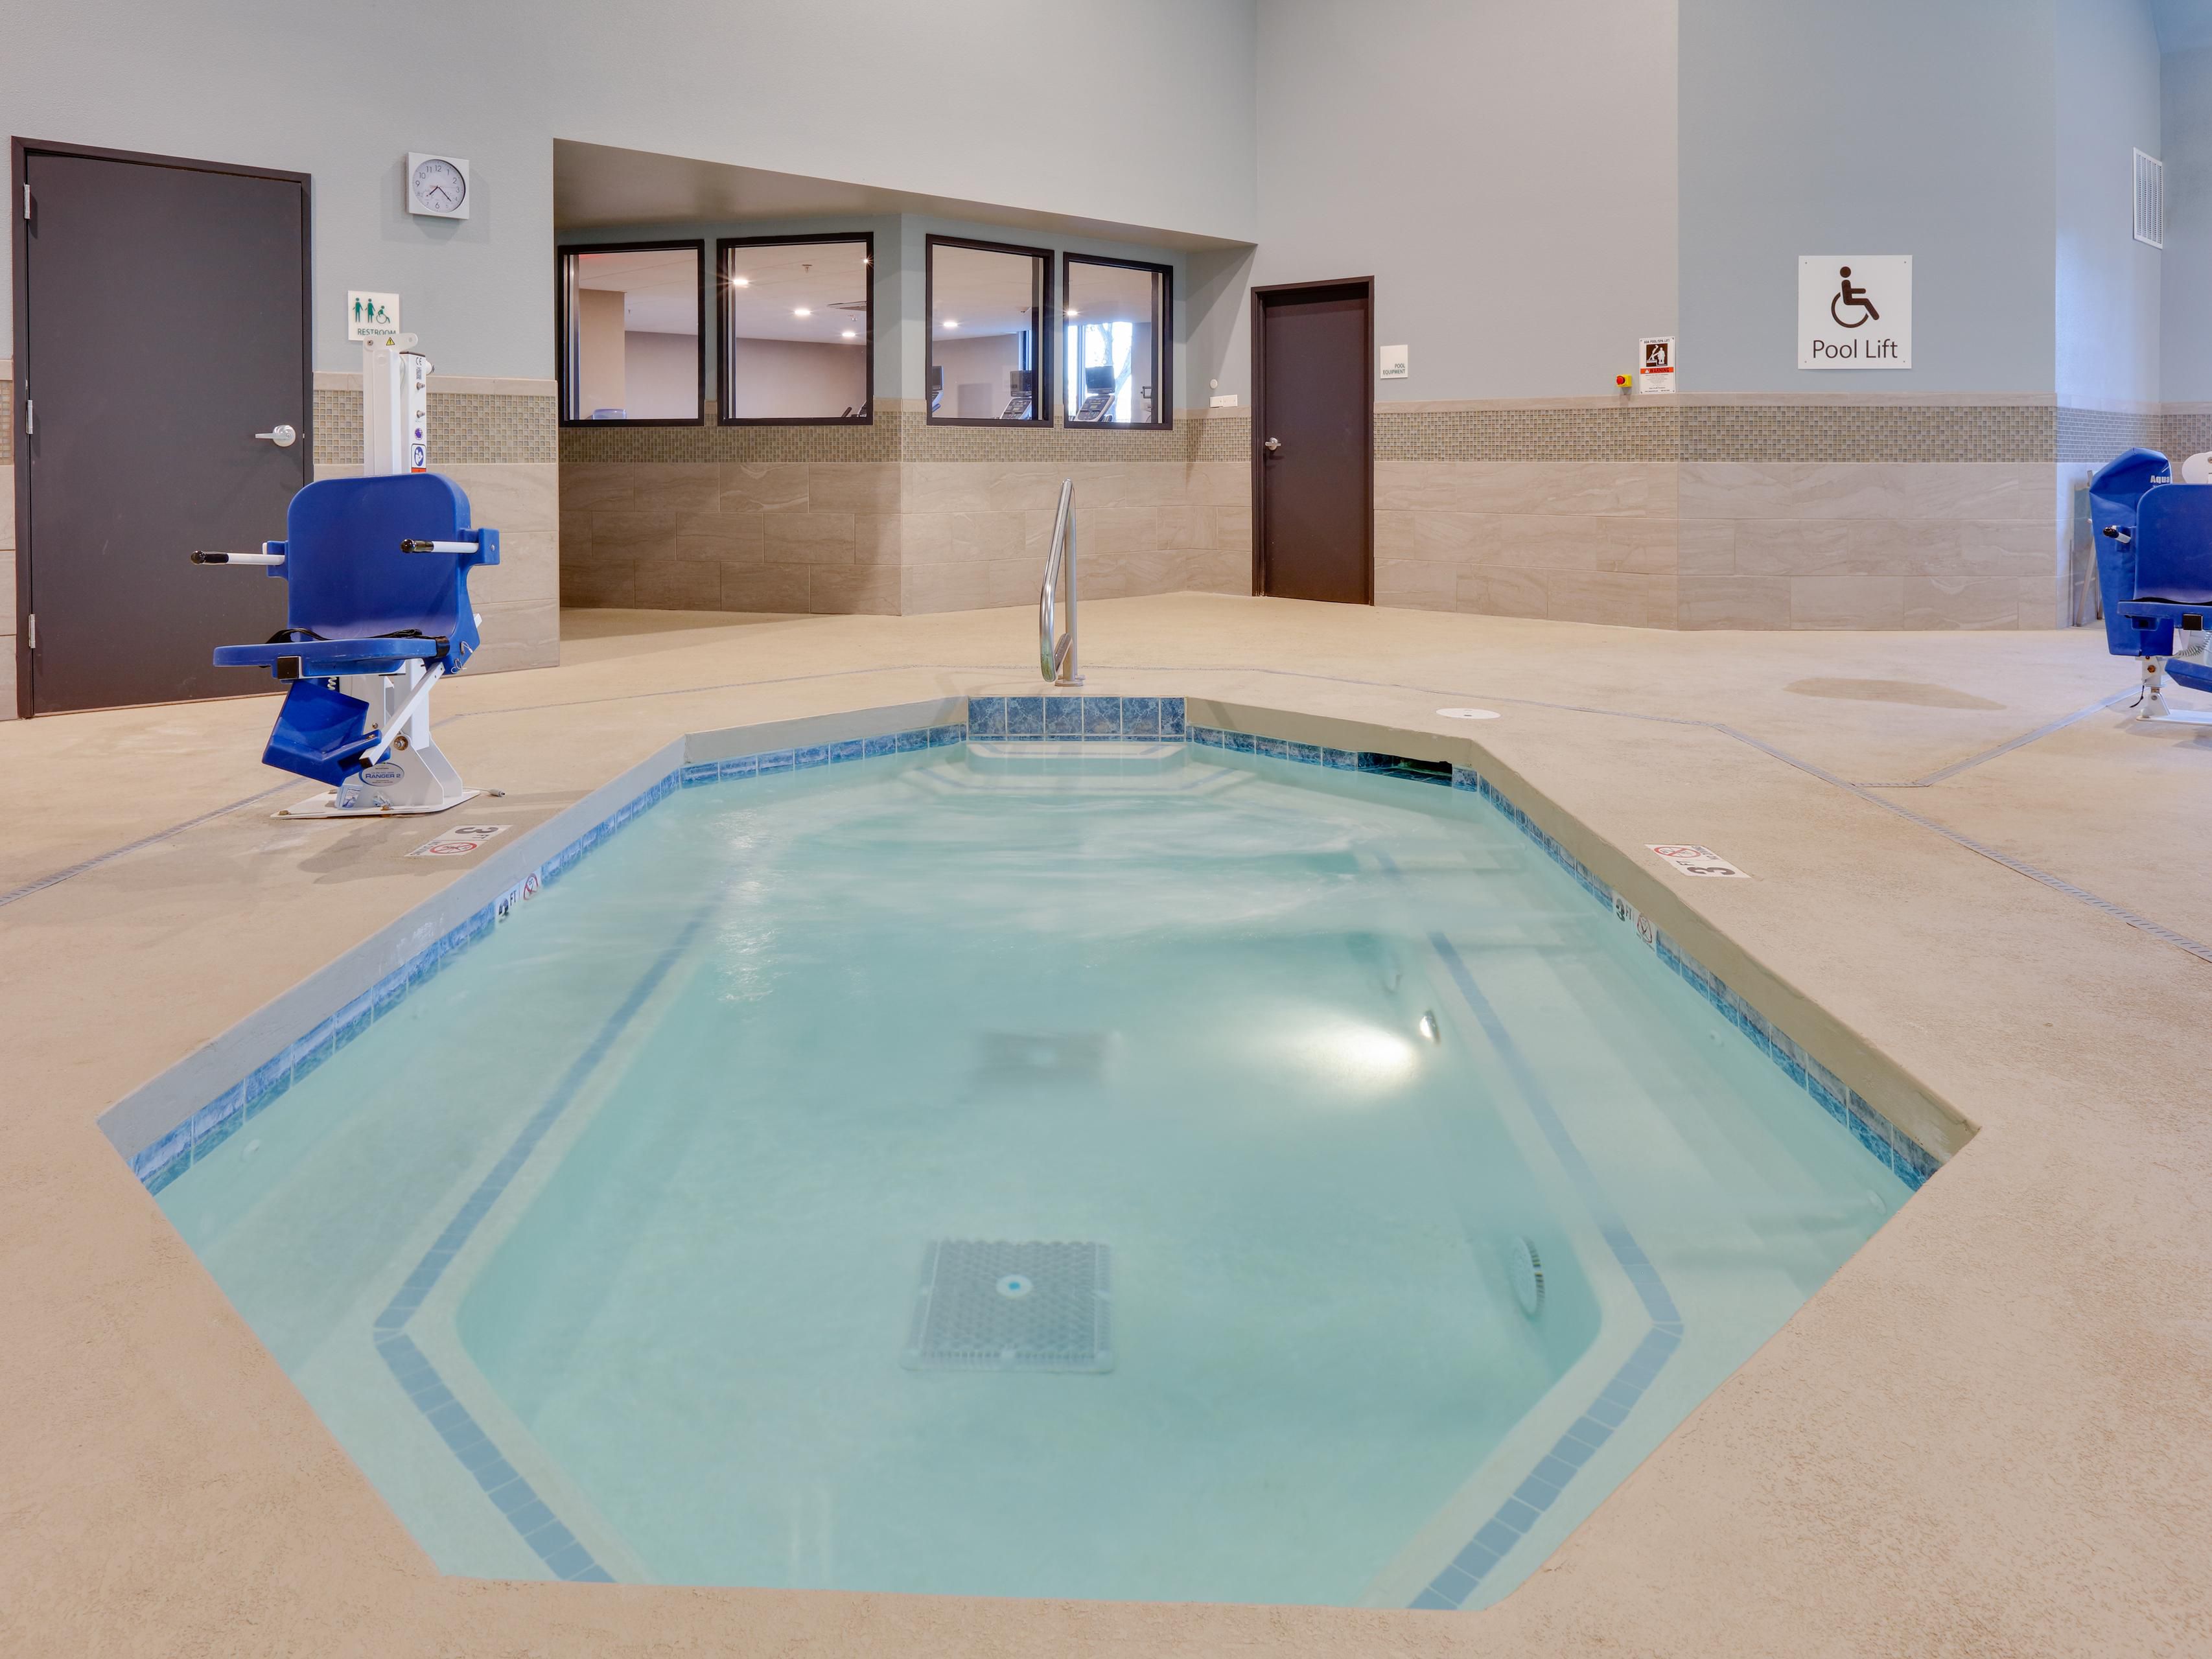 Our indoor pool and fitness center are open daily from 6am to 12am. 